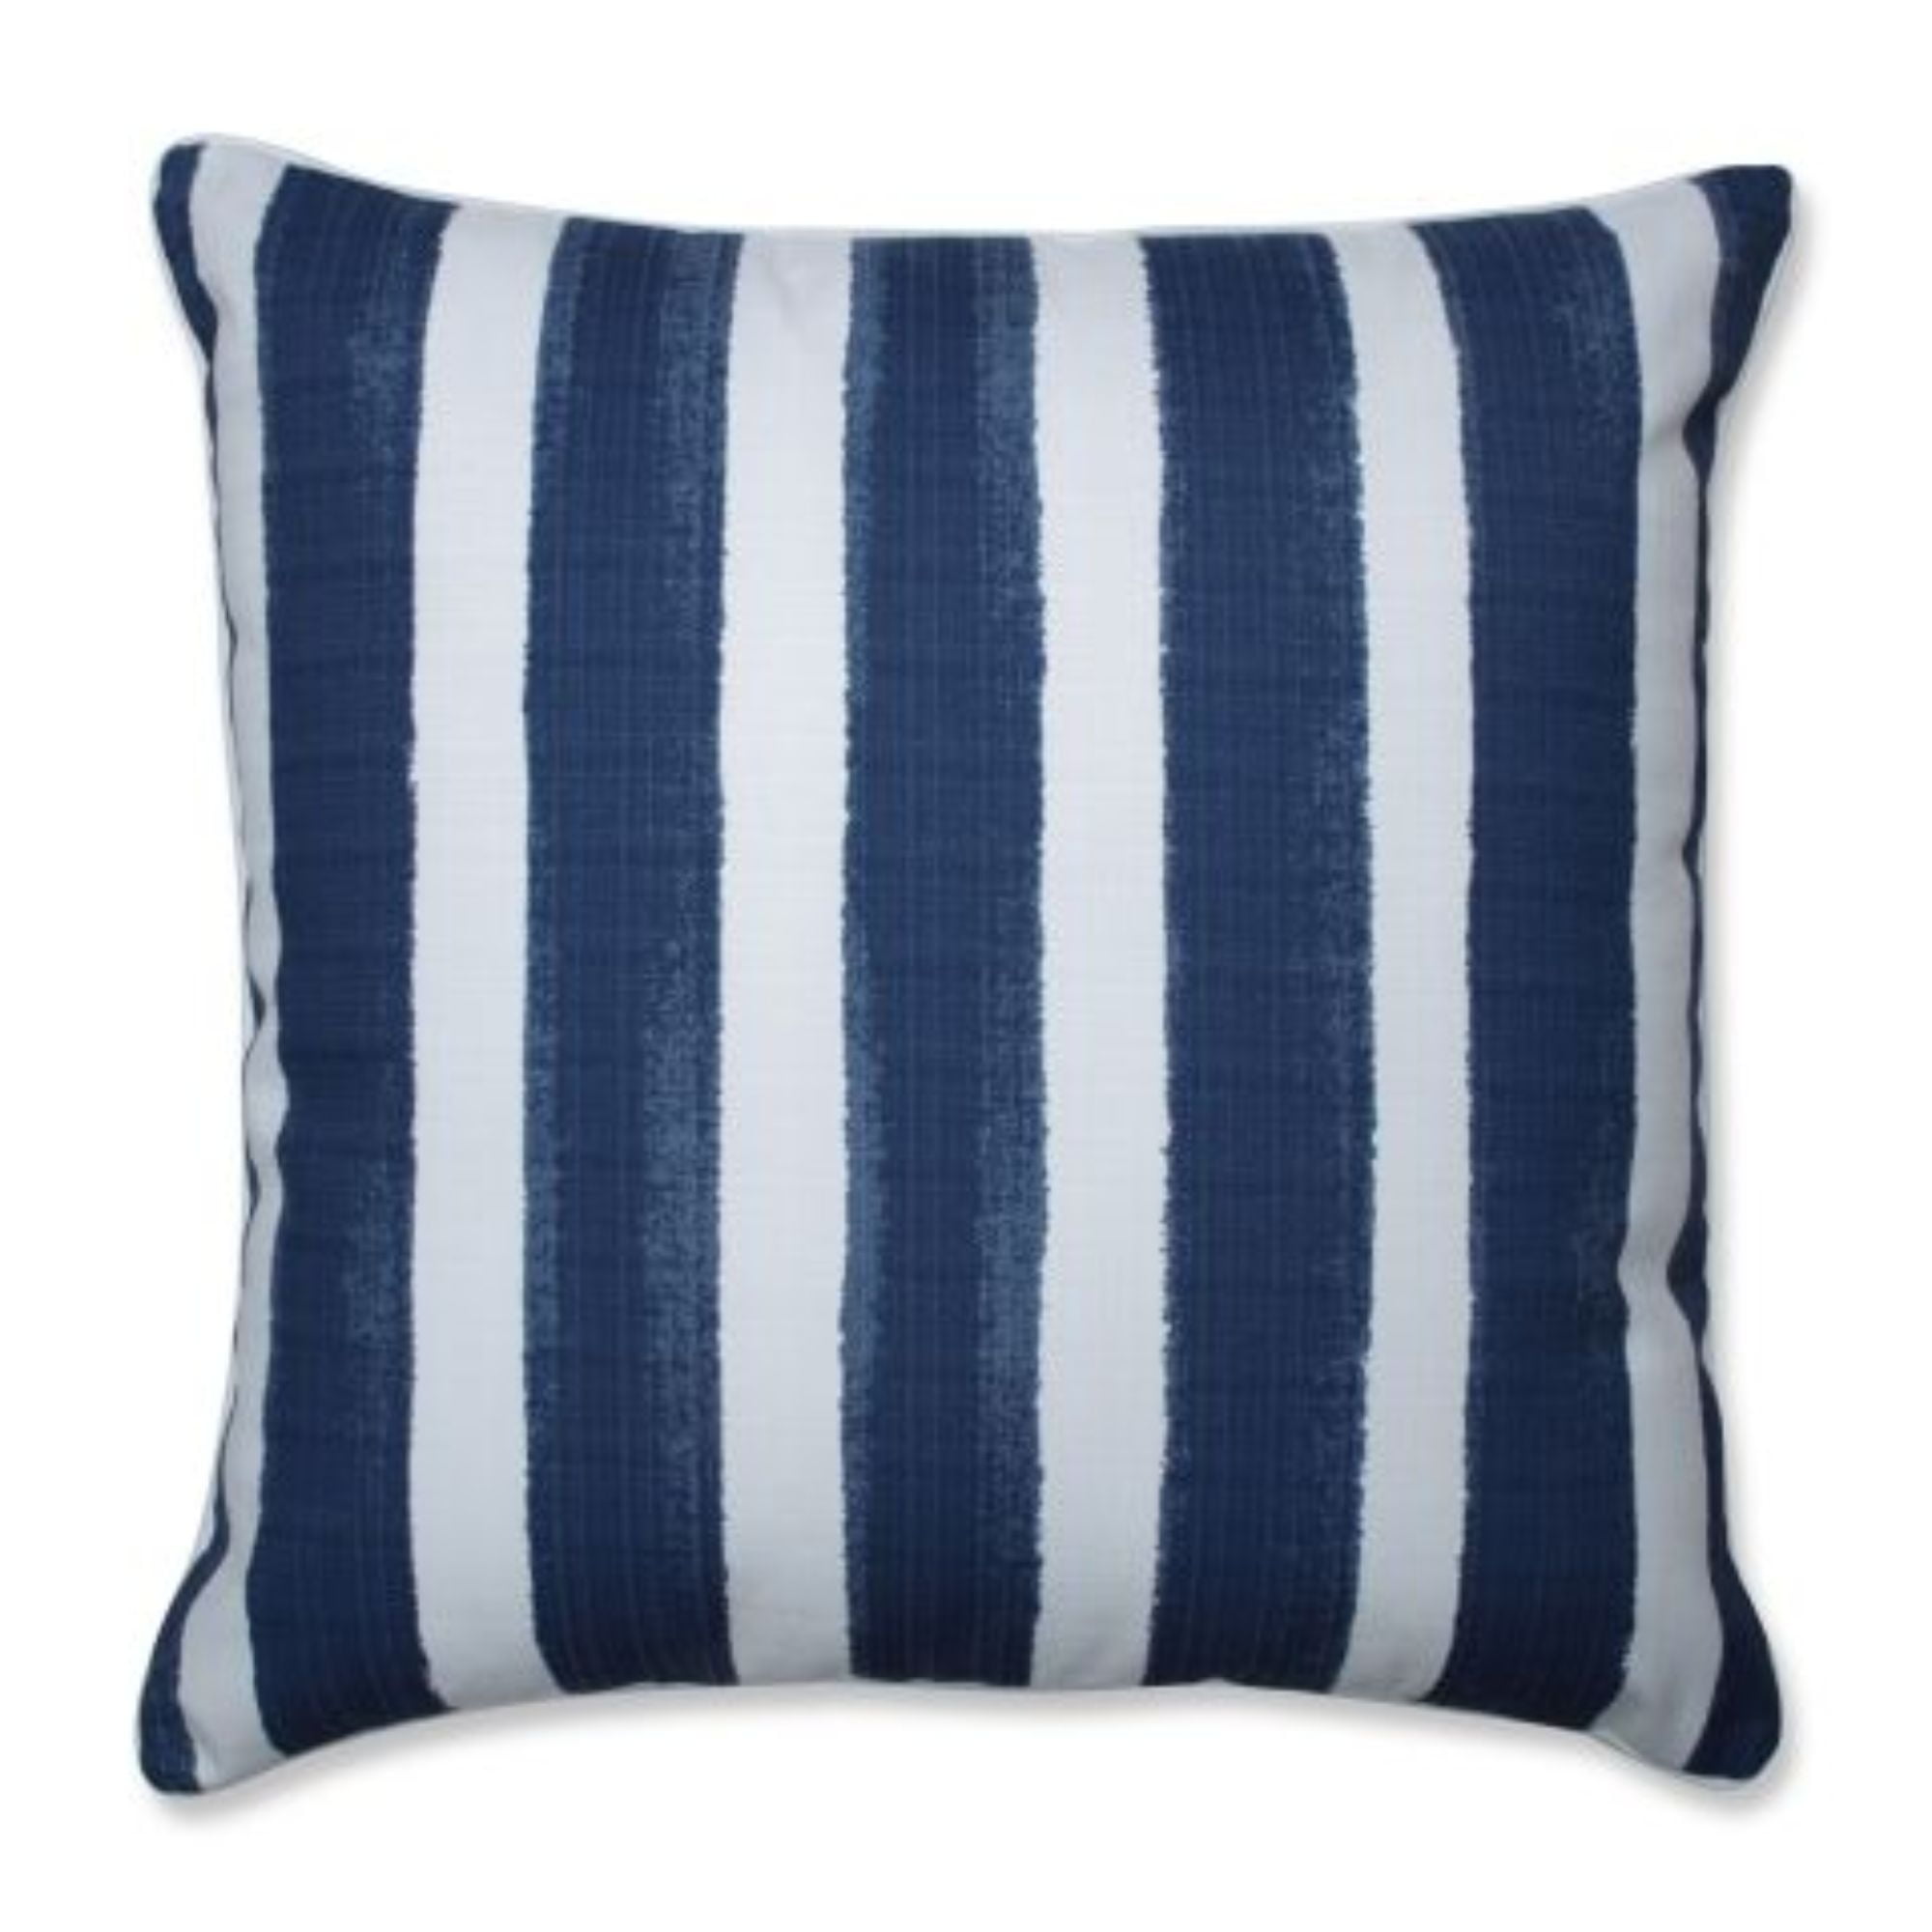 25" Blue and White Striped UV Resistant Outdoor Patio Square Floor Pillow